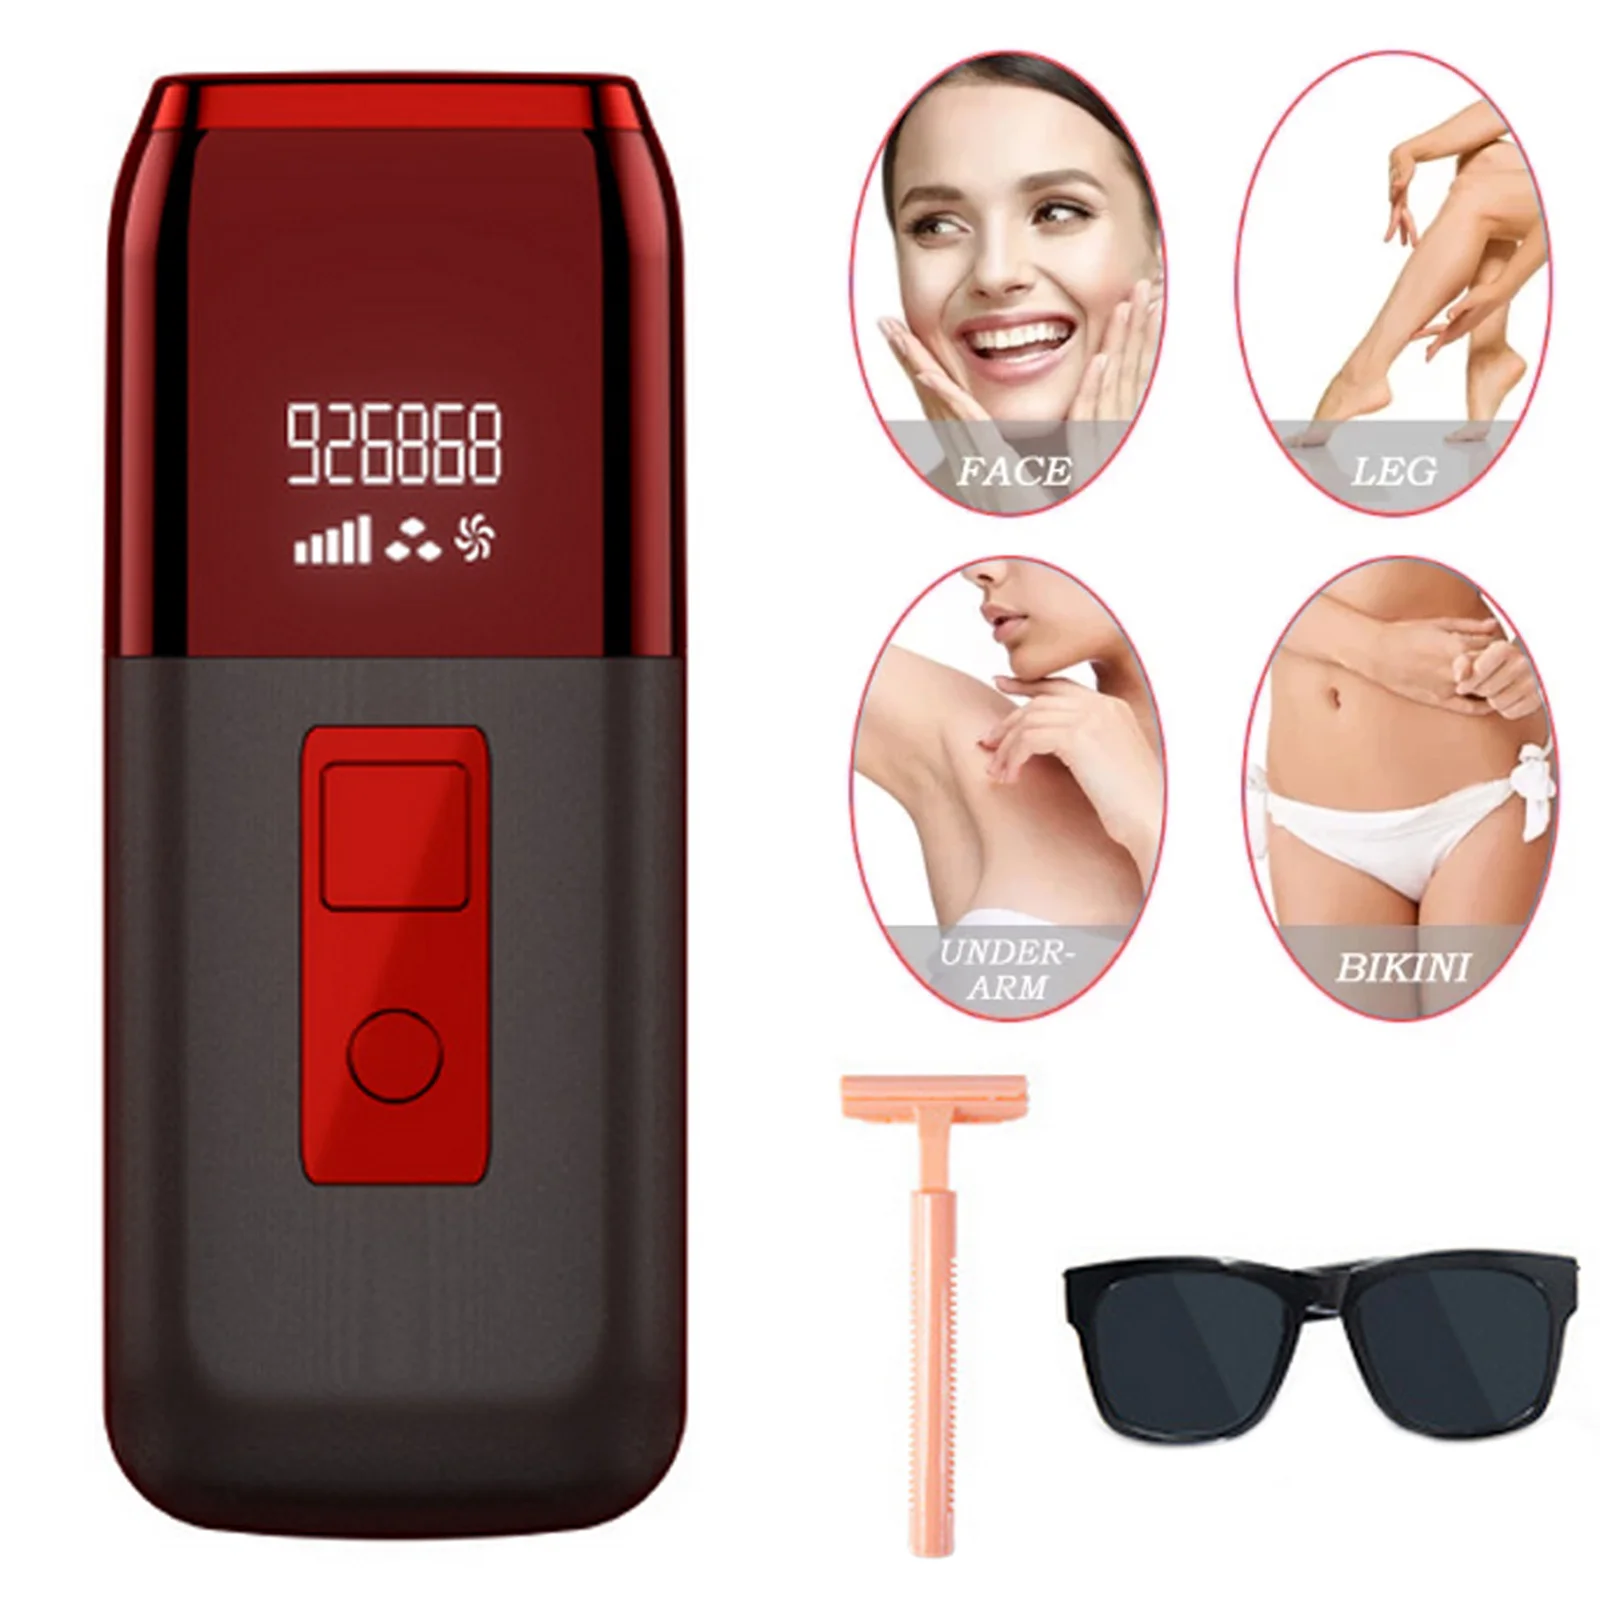 Hair Remover Portable Painless 1000000 Flashes IPL Hair Removal Device Machine with Shaver Goggles Whole Body Home Use EU Plug bear amblyopia goggles for children with monocular correction shading cartoon handmade pure cotton light